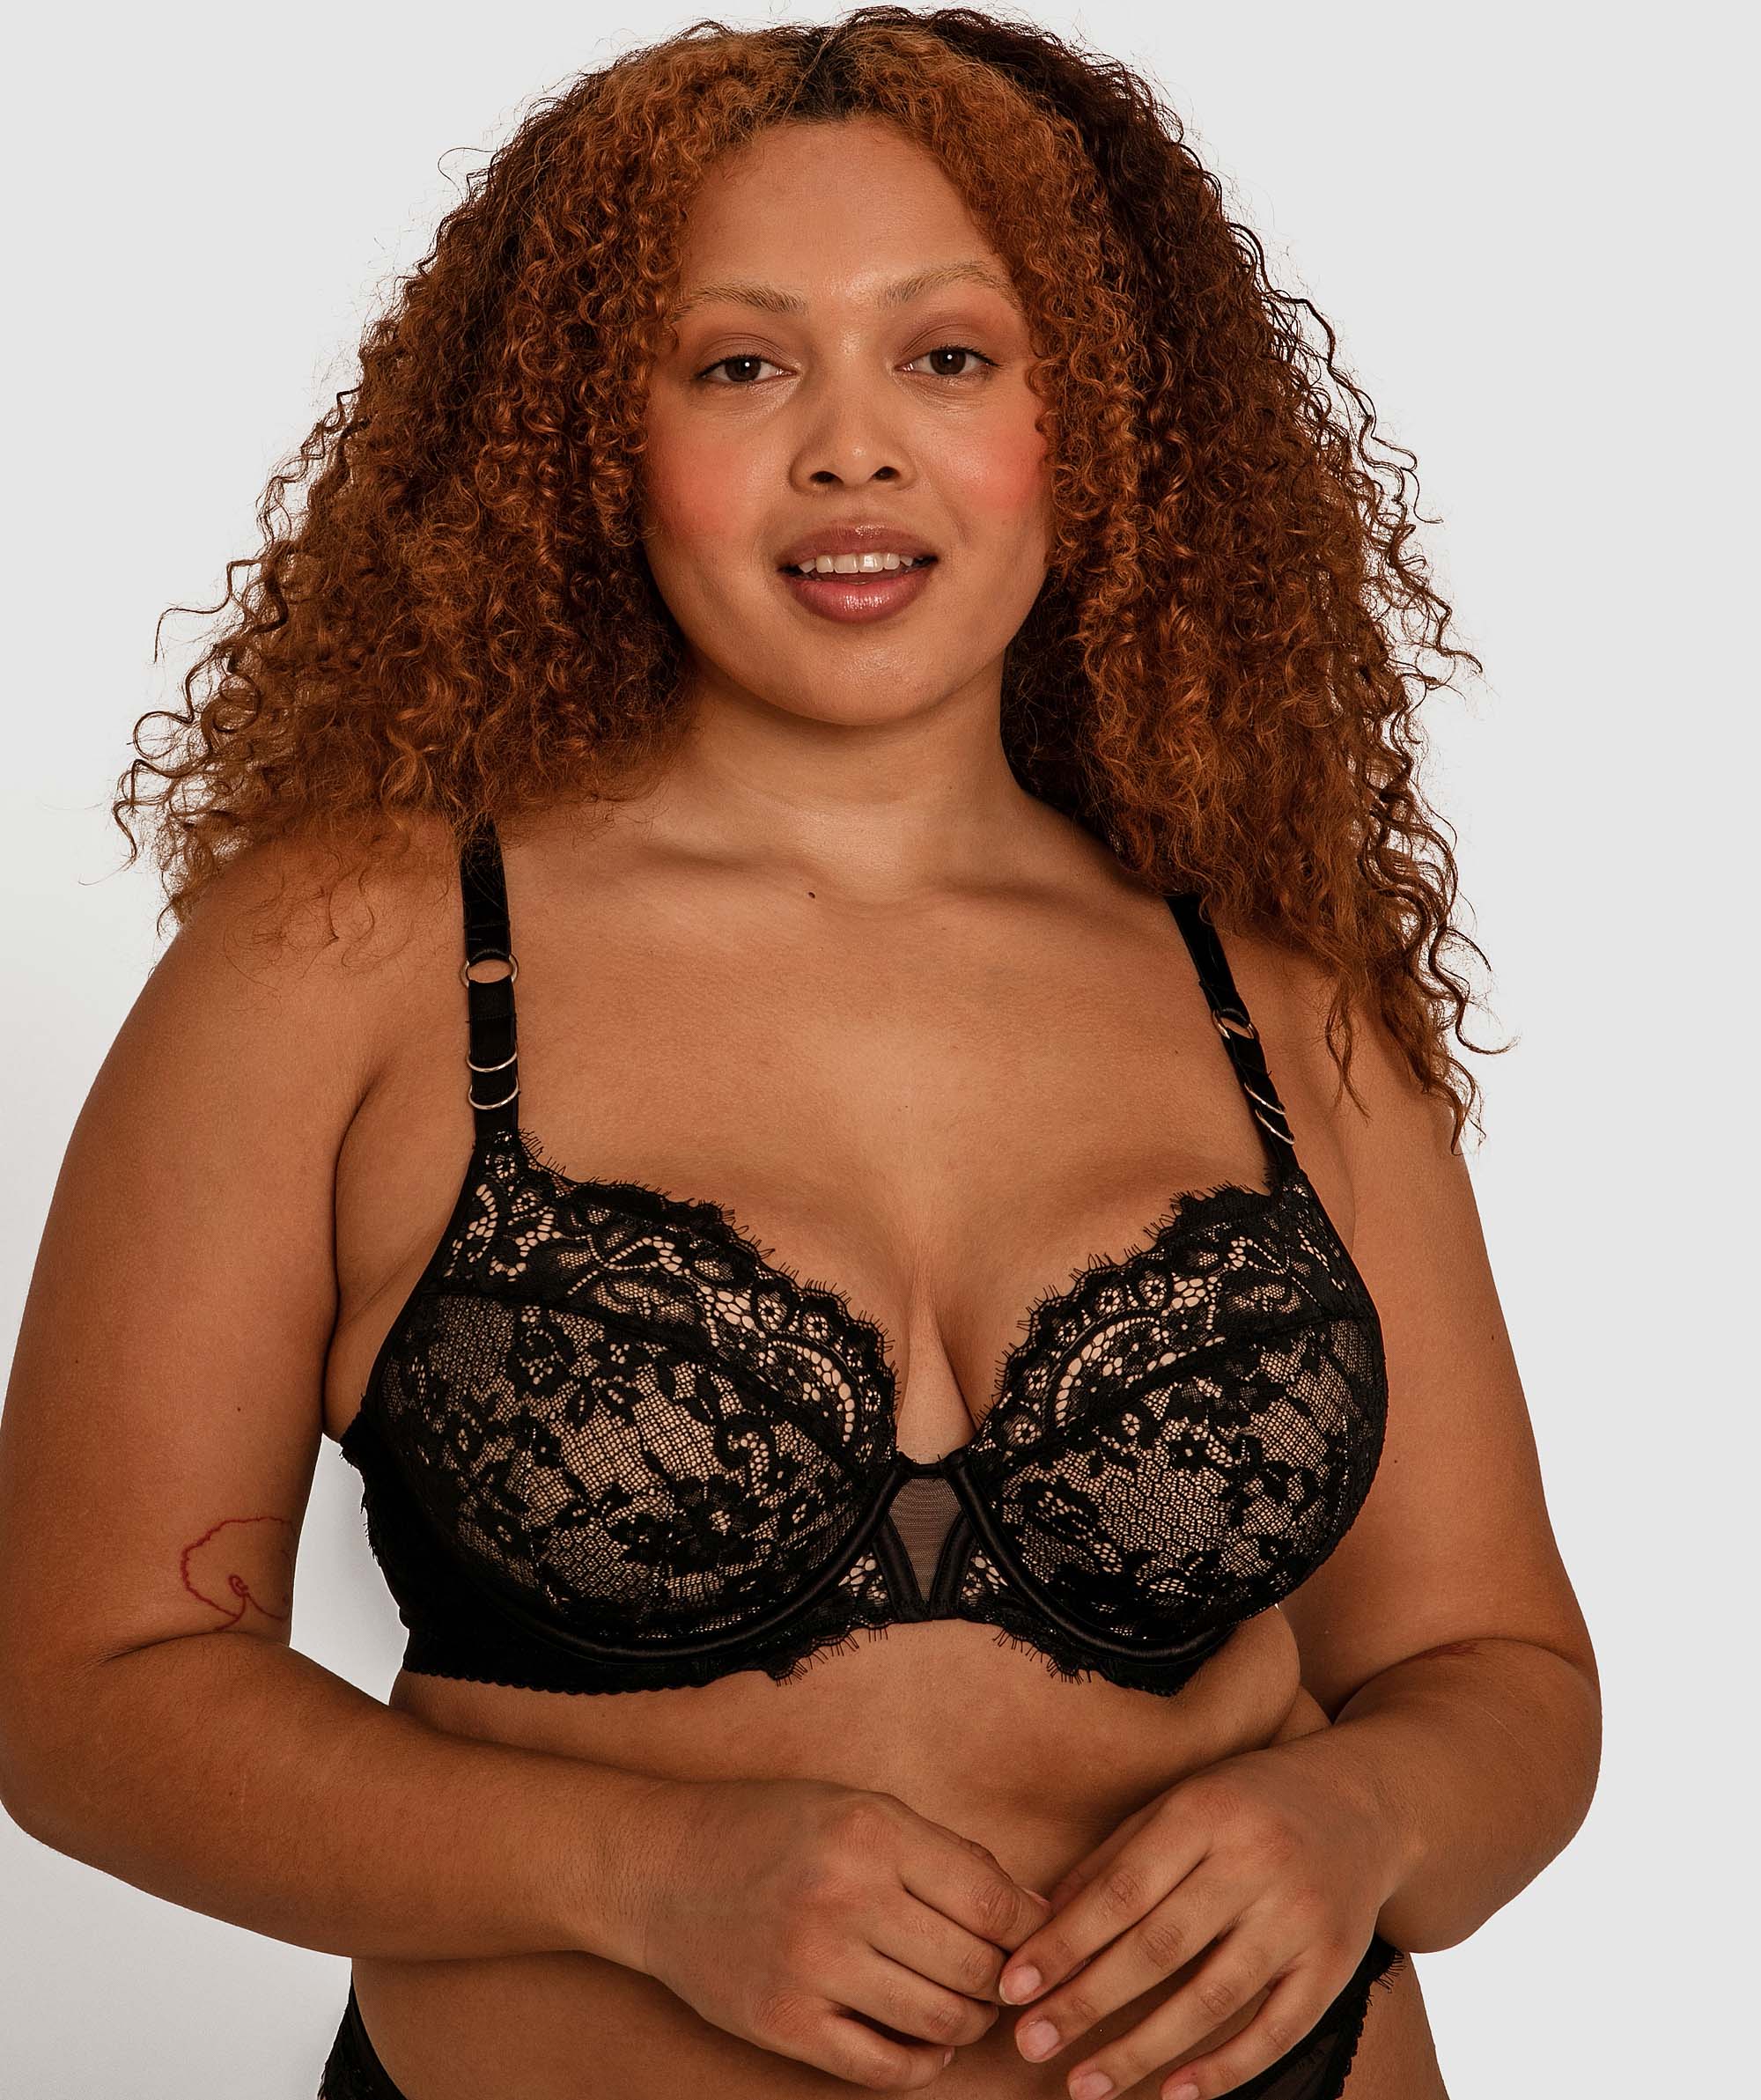 All About Me Plunge Full Cup Bra - Black